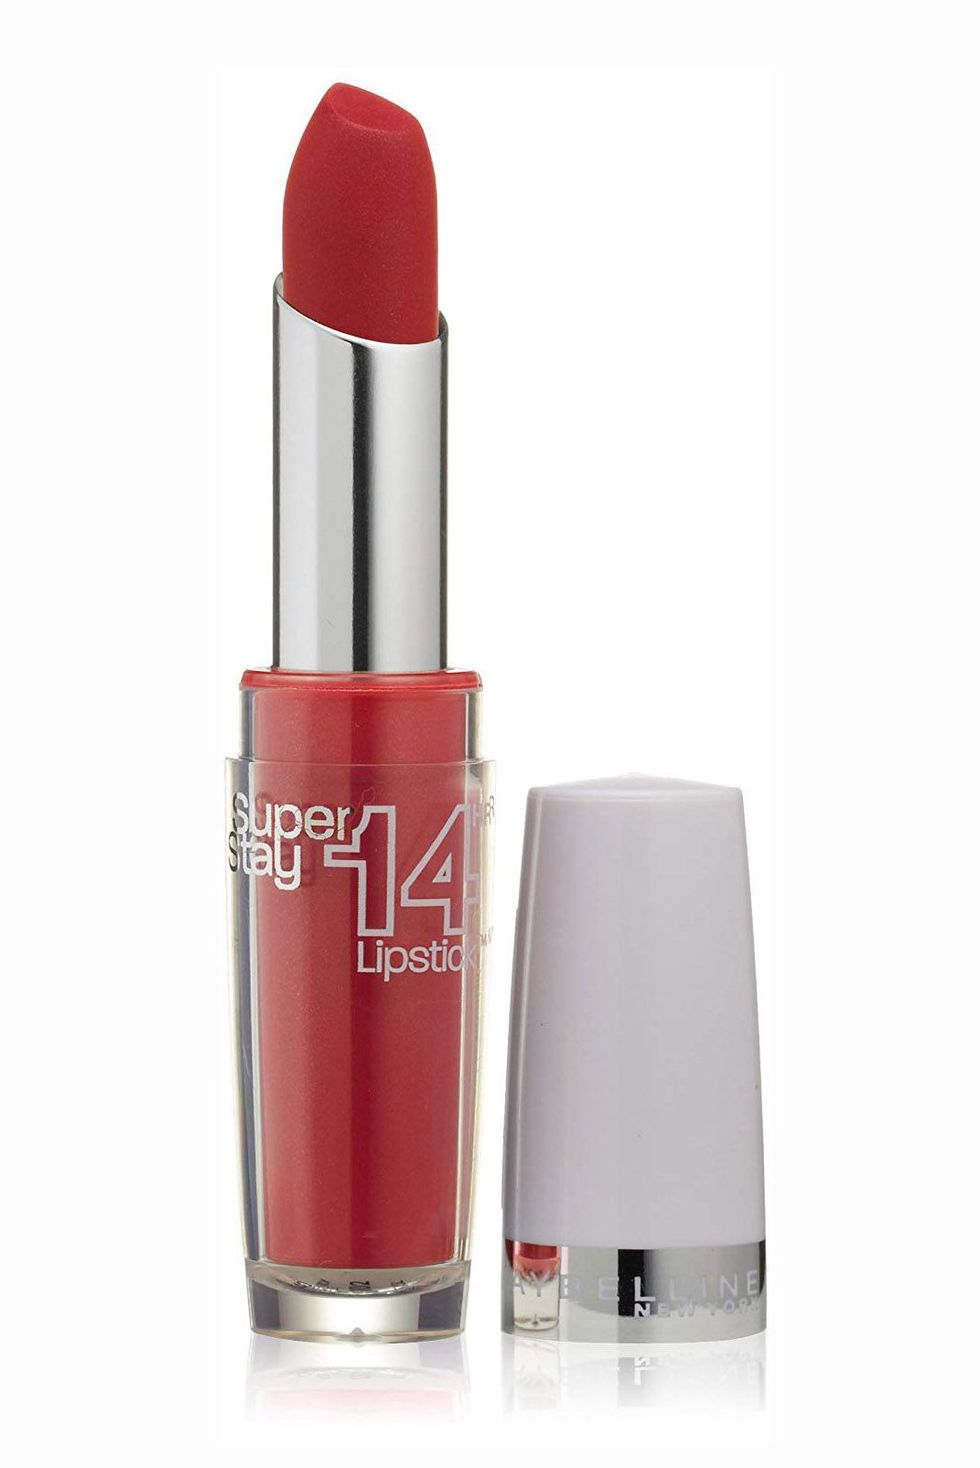 SuperStay 14-Hour Lipstick in Continuous Cranberry 